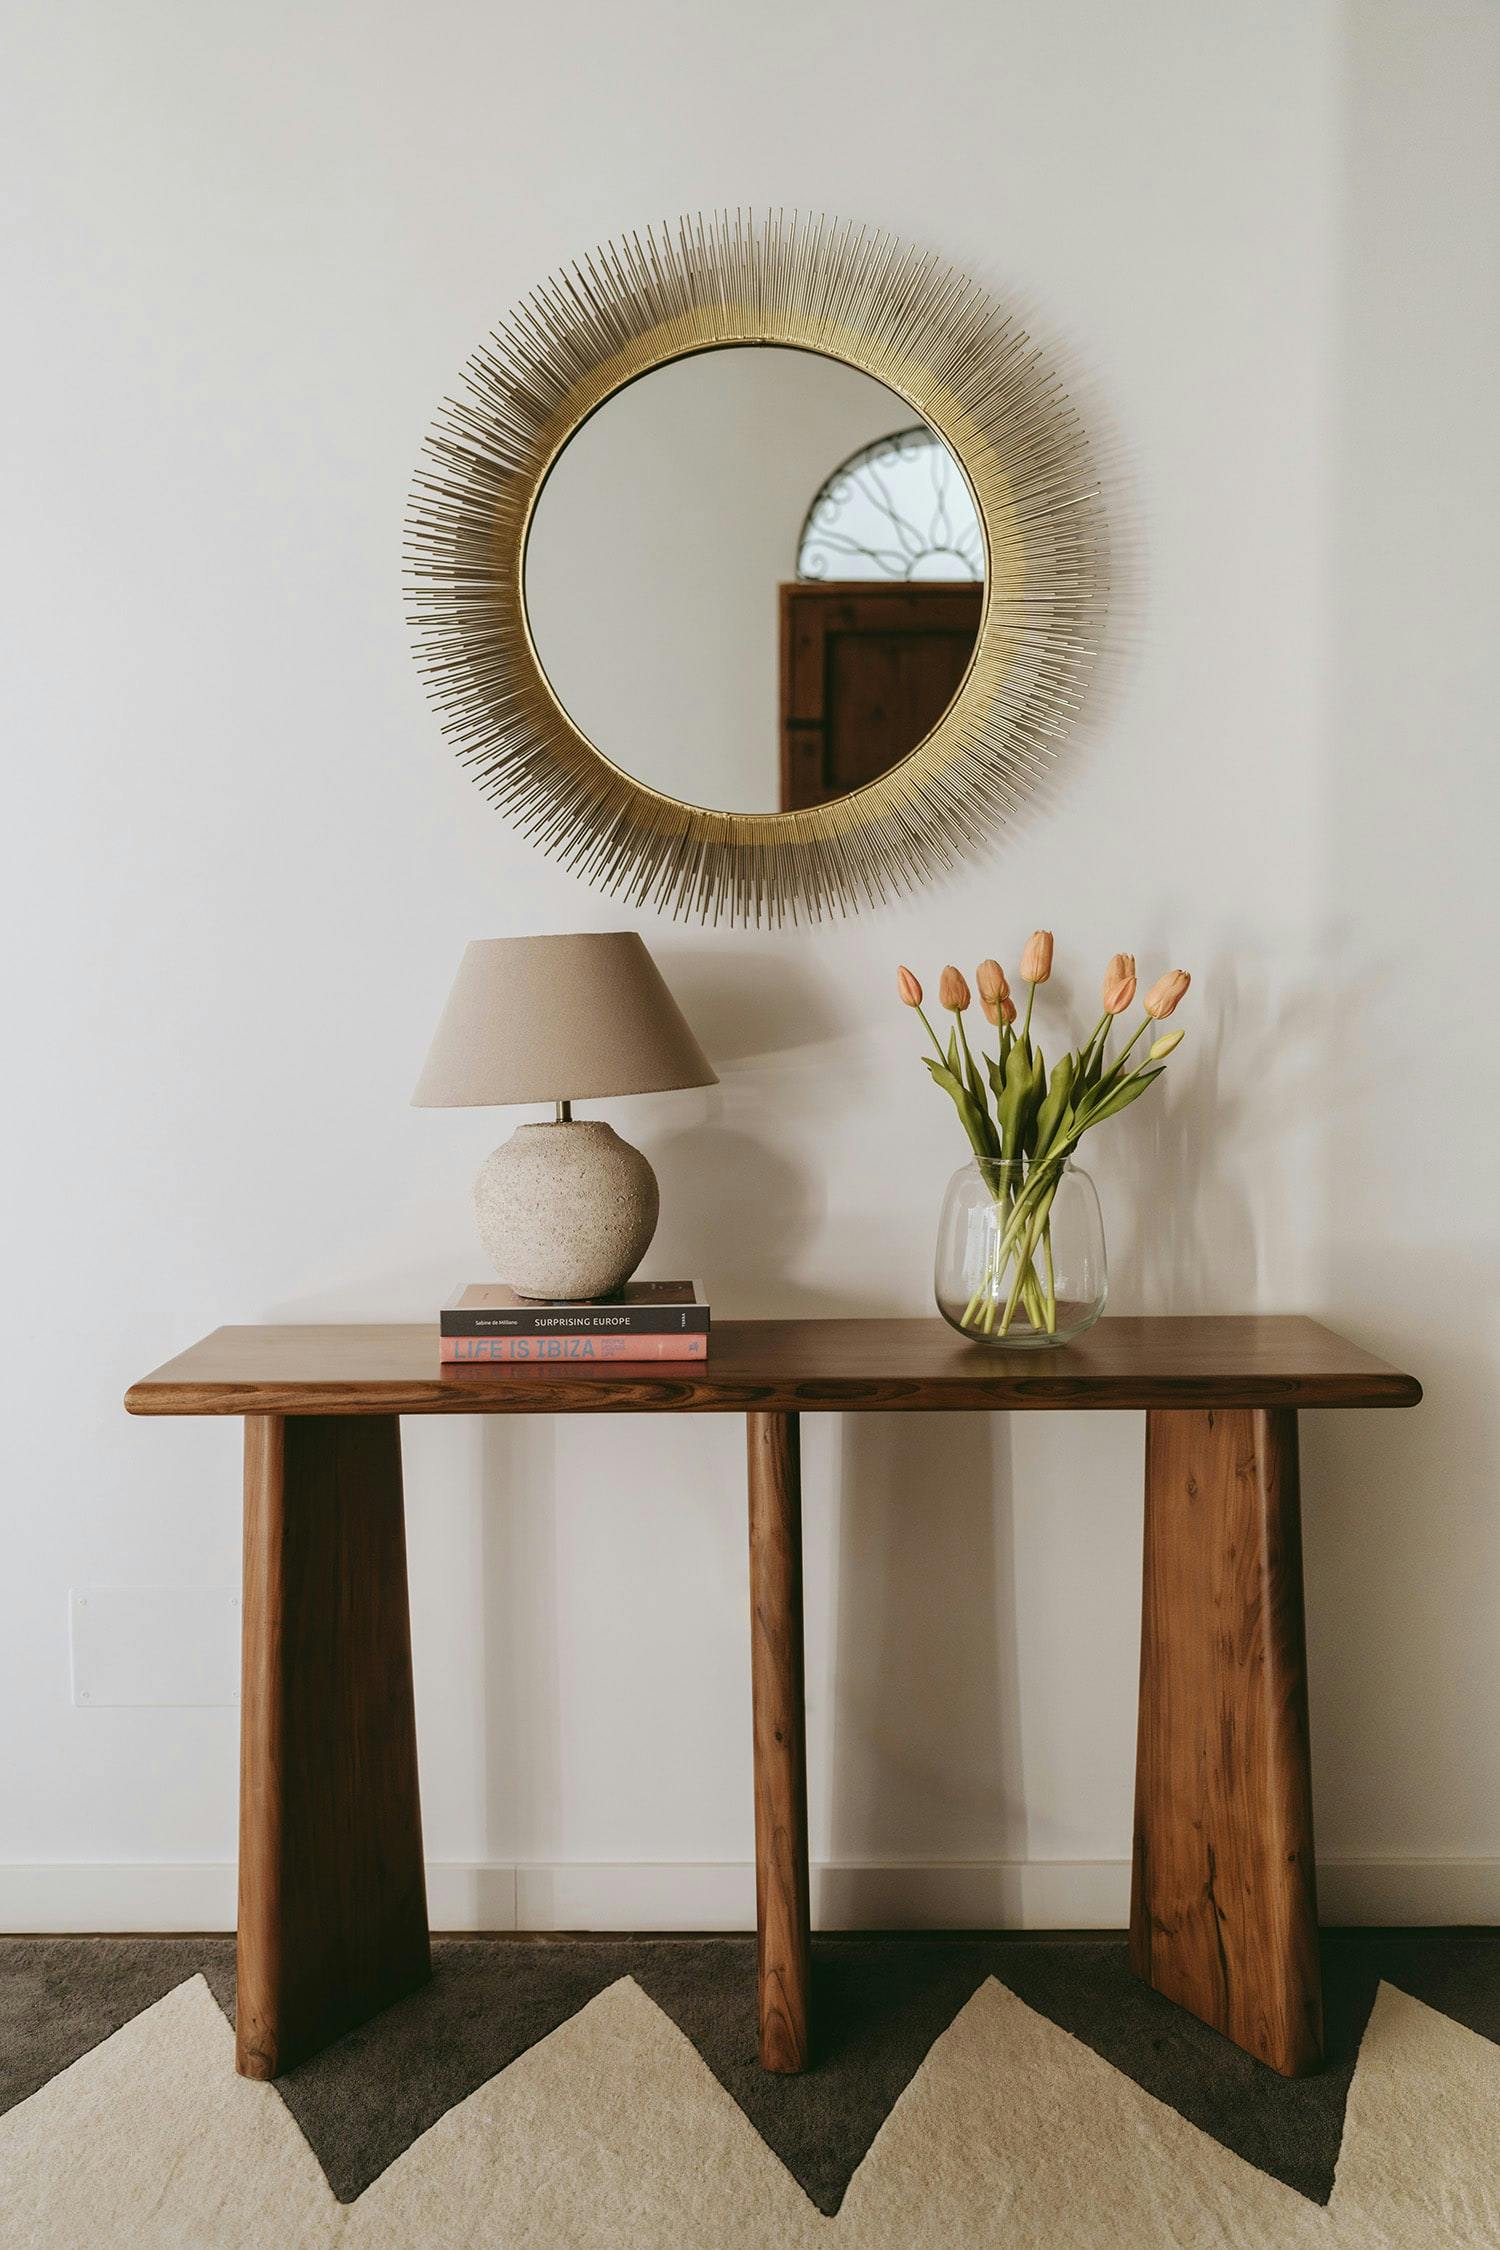 A wooden table with a mirror and a vase of flowers is placed in front of a white wall, creating a visually appealing and harmonious arrangement.